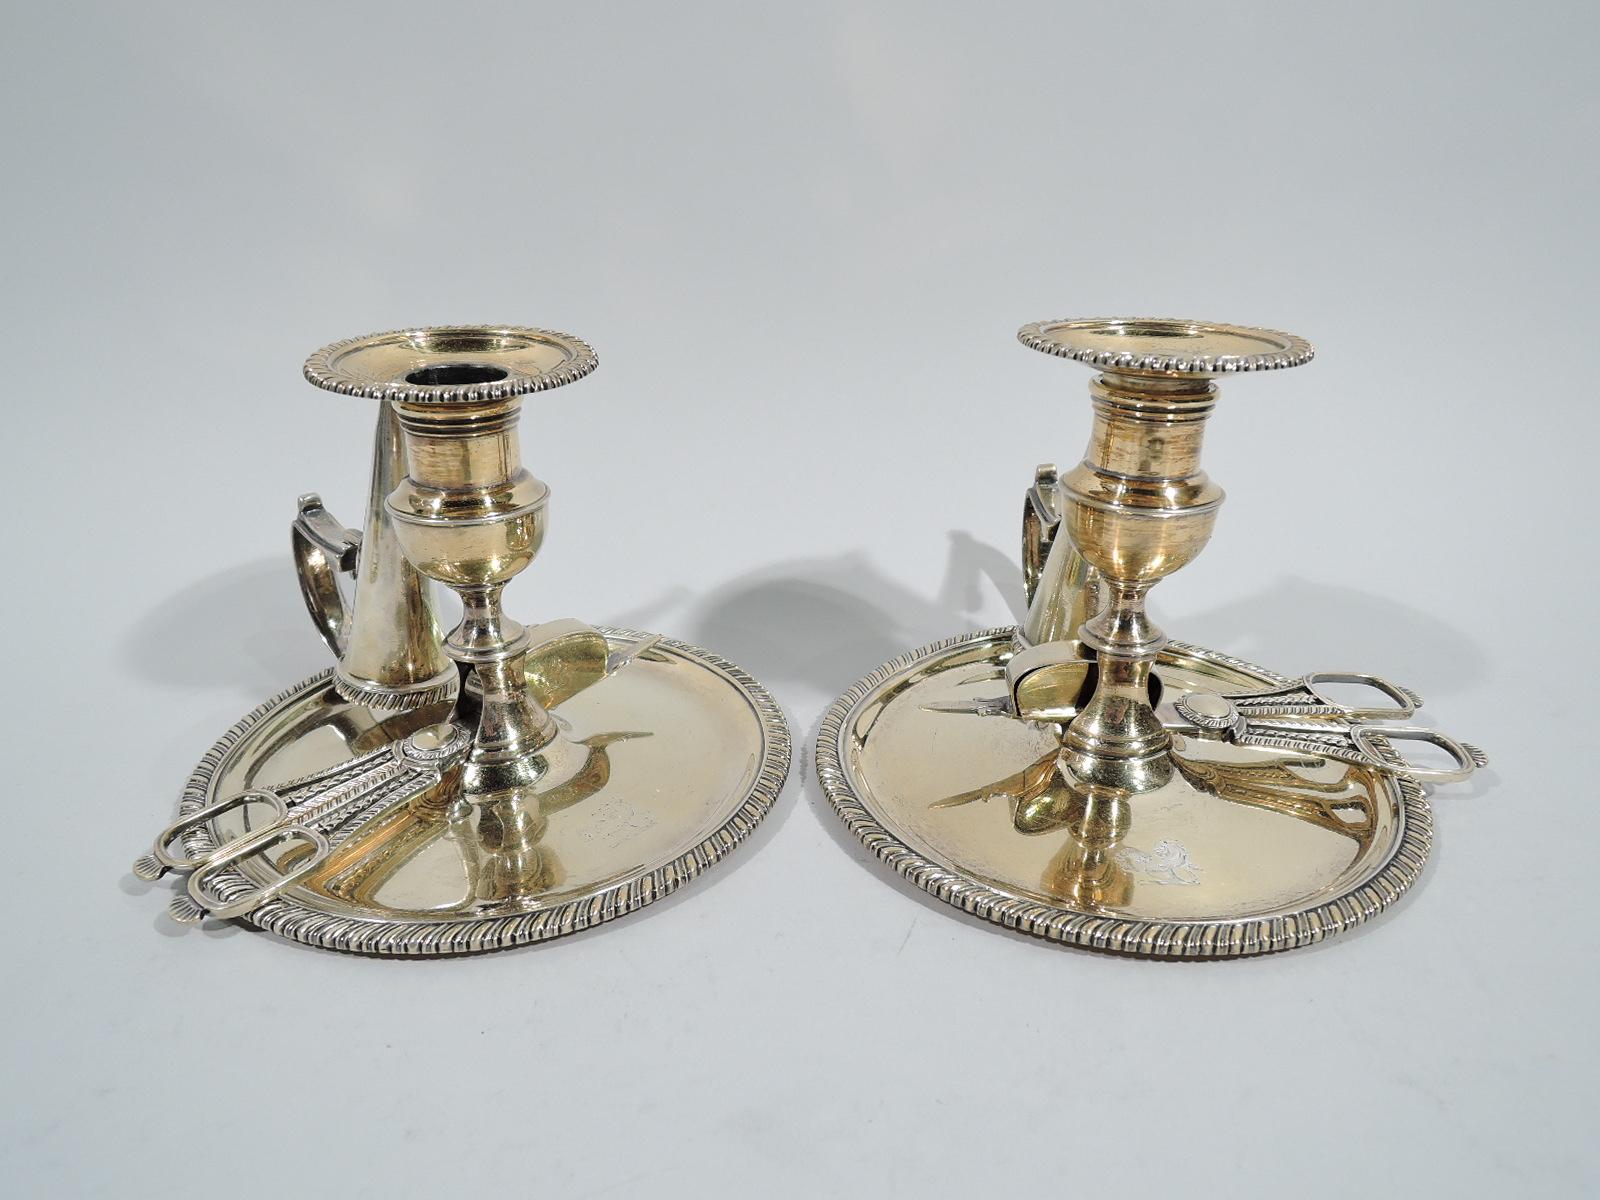 Pair of George III gilt sterling silver chambersticks. Made by Thomas & George Hayter in London in 1819. Each: Campana socket on spool foot mounted to open base inset with wick cutters. Round wax pan with capped flying scroll handle holding conical